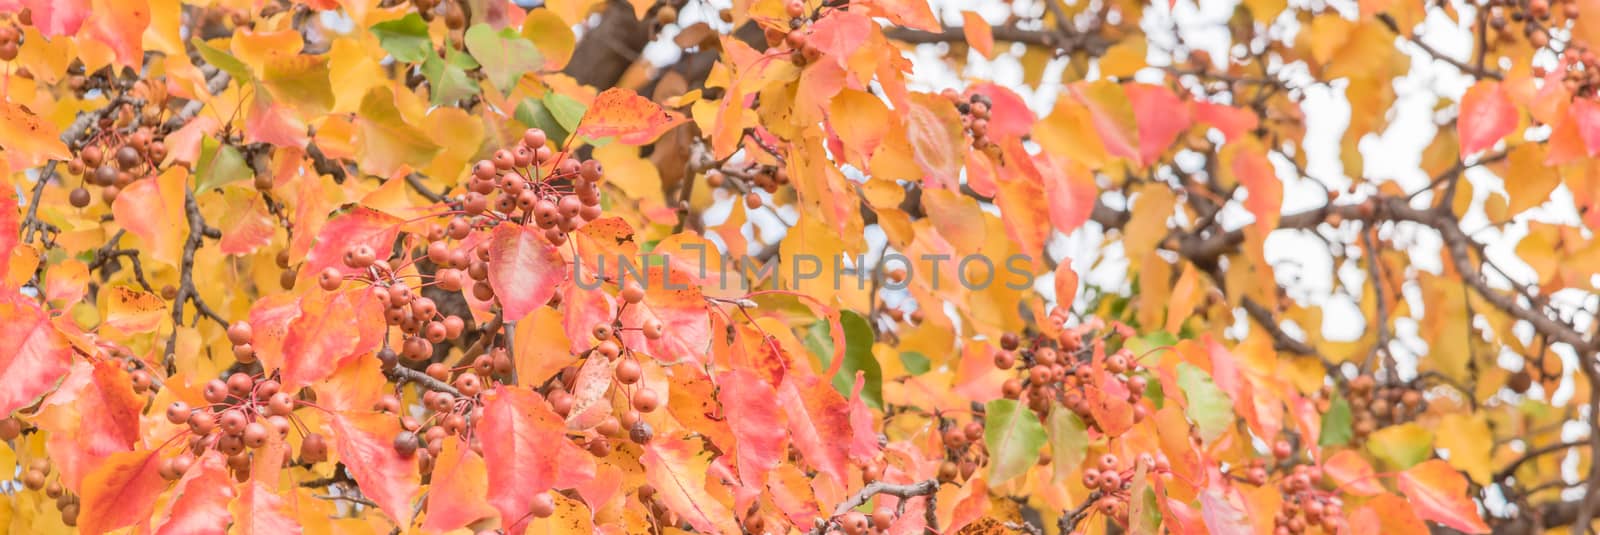 Panorama view fall colors on Bradford pear tree leaves and fruits with combinations of green, orange, yellow, red. Beautiful changing season and autumn background in Texas, America.